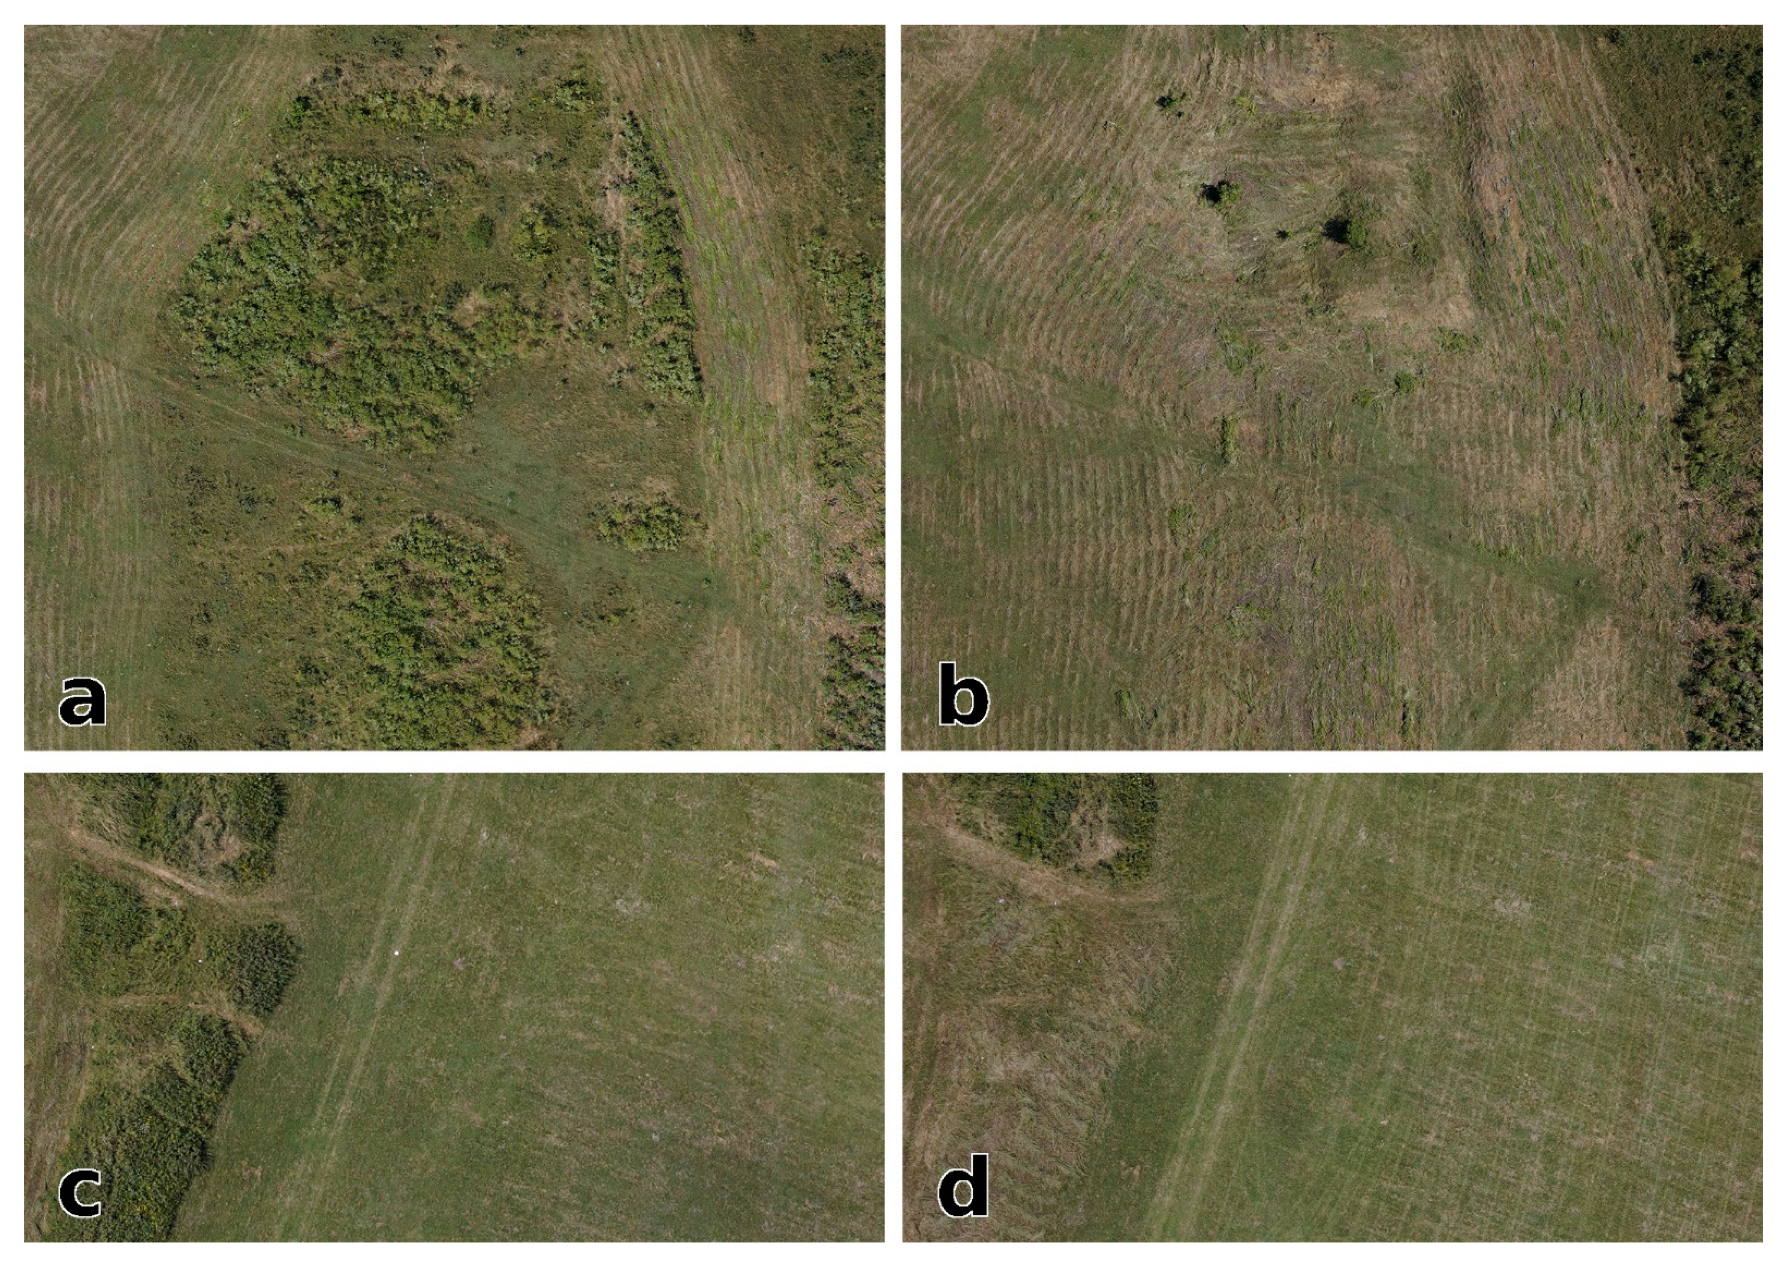 Remote Sensing | Free Full-Text | Integrating Geophysical and Photographic  Data to Visualize the Quarried Structures of the Roman Town of Bassianae |  HTML